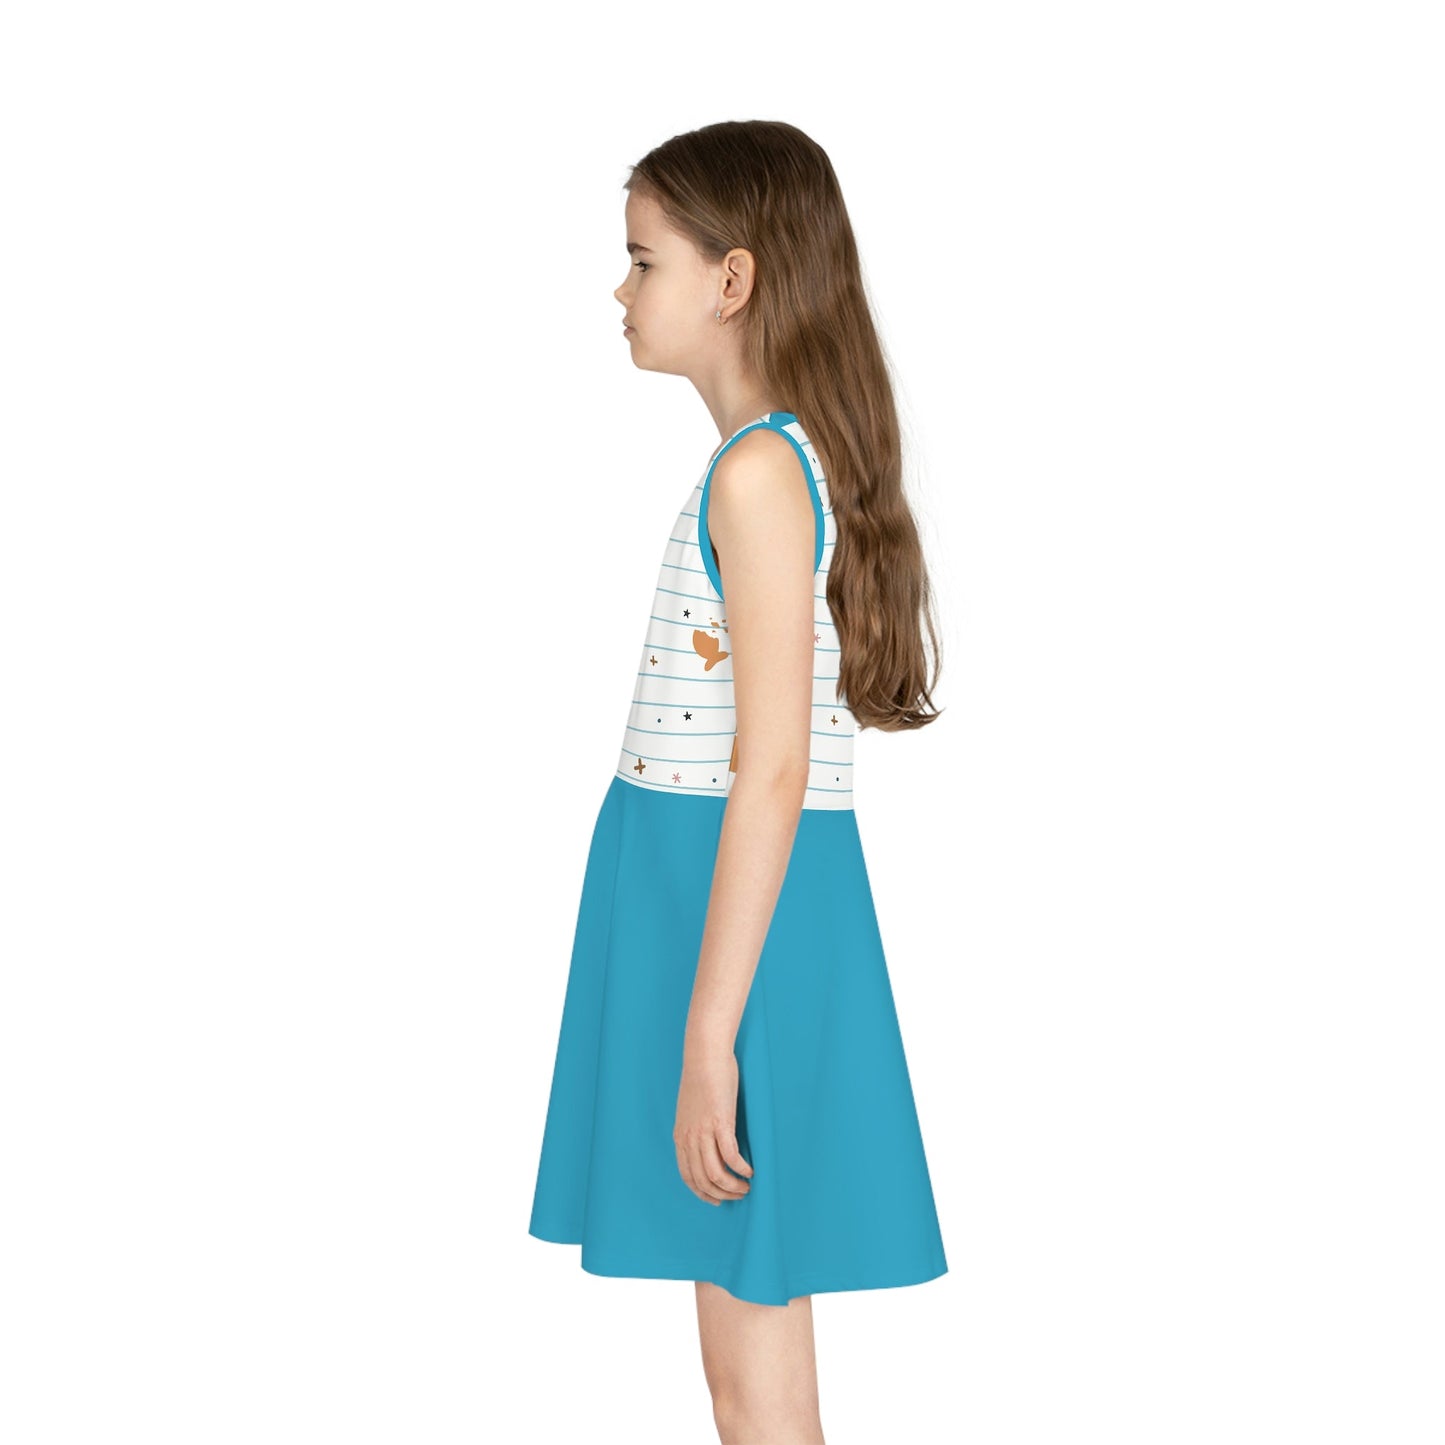 Back to School Girls' Sleeveless Sundress All Over PrintAOPAOP Clothing#tag4##tag5##tag6#